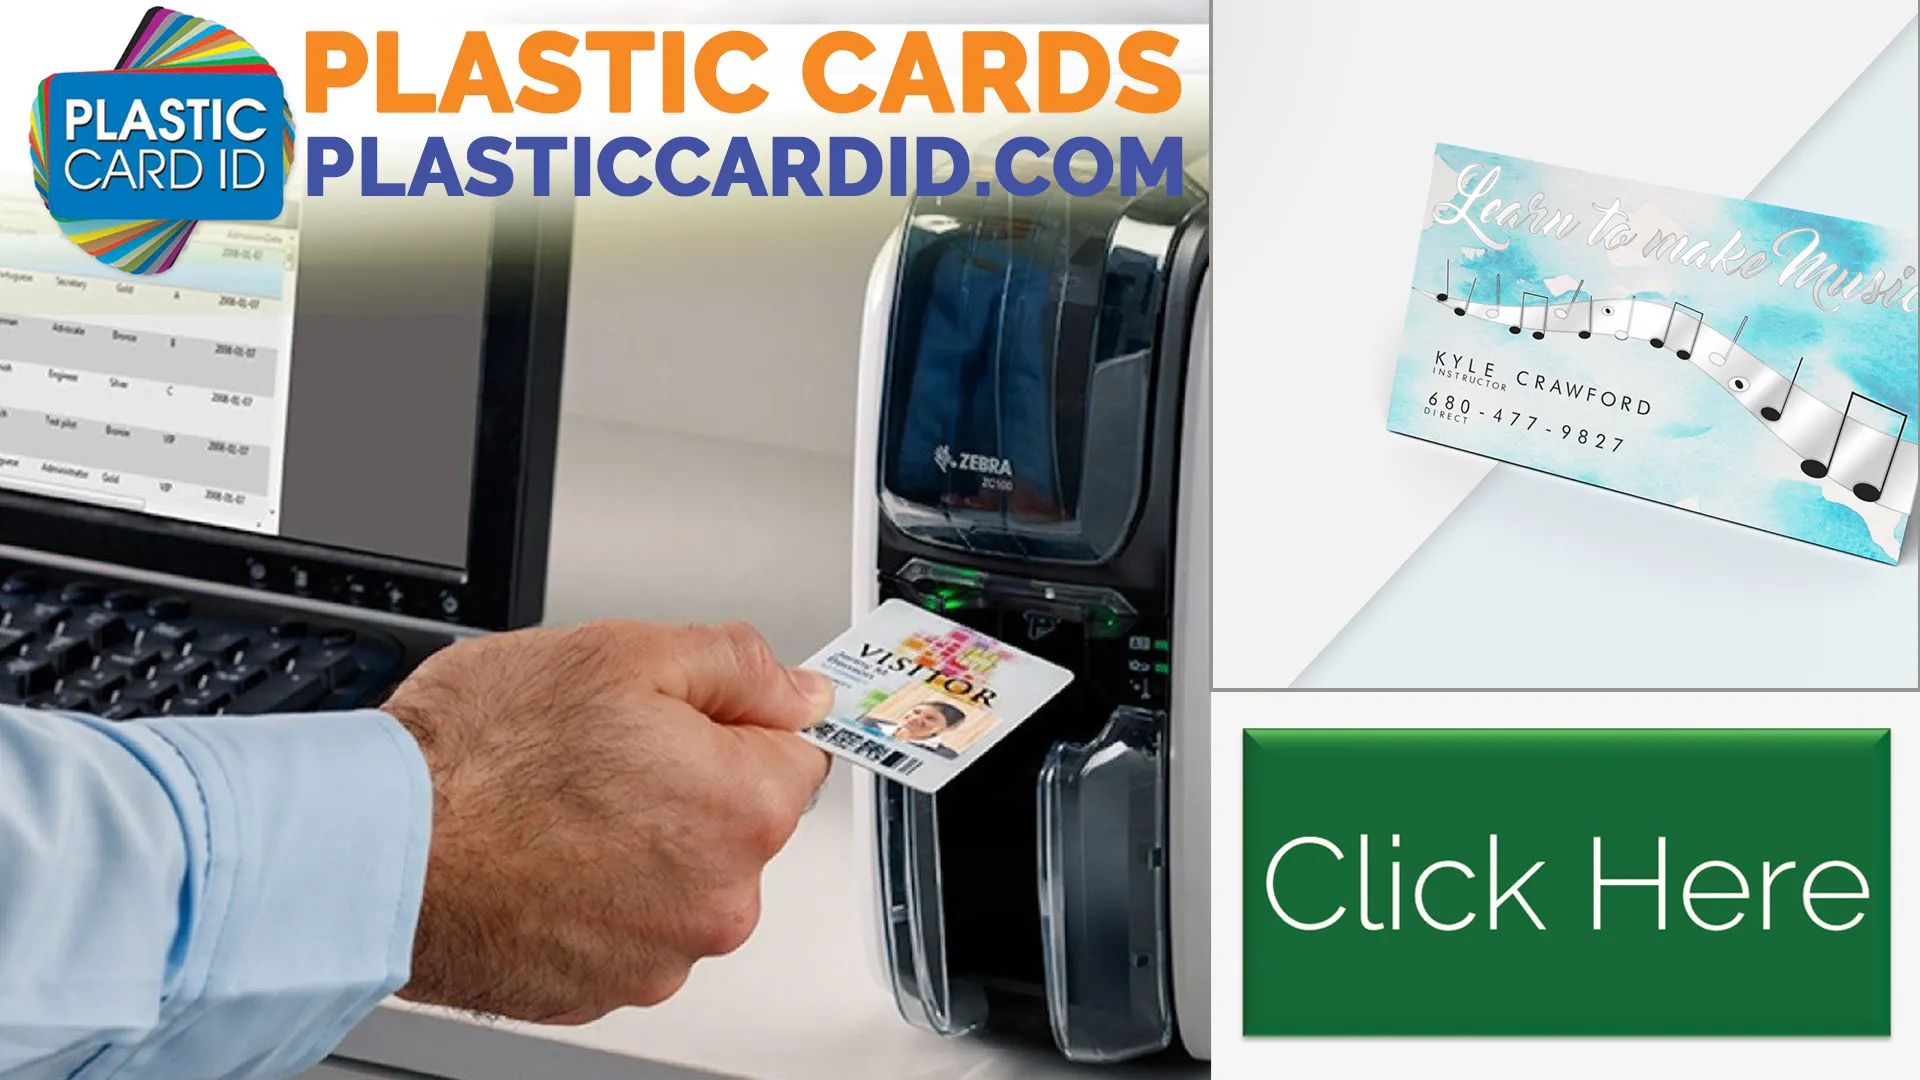 Welcome to the World of Card Printer Care and Maintenance from Plastic Card ID




